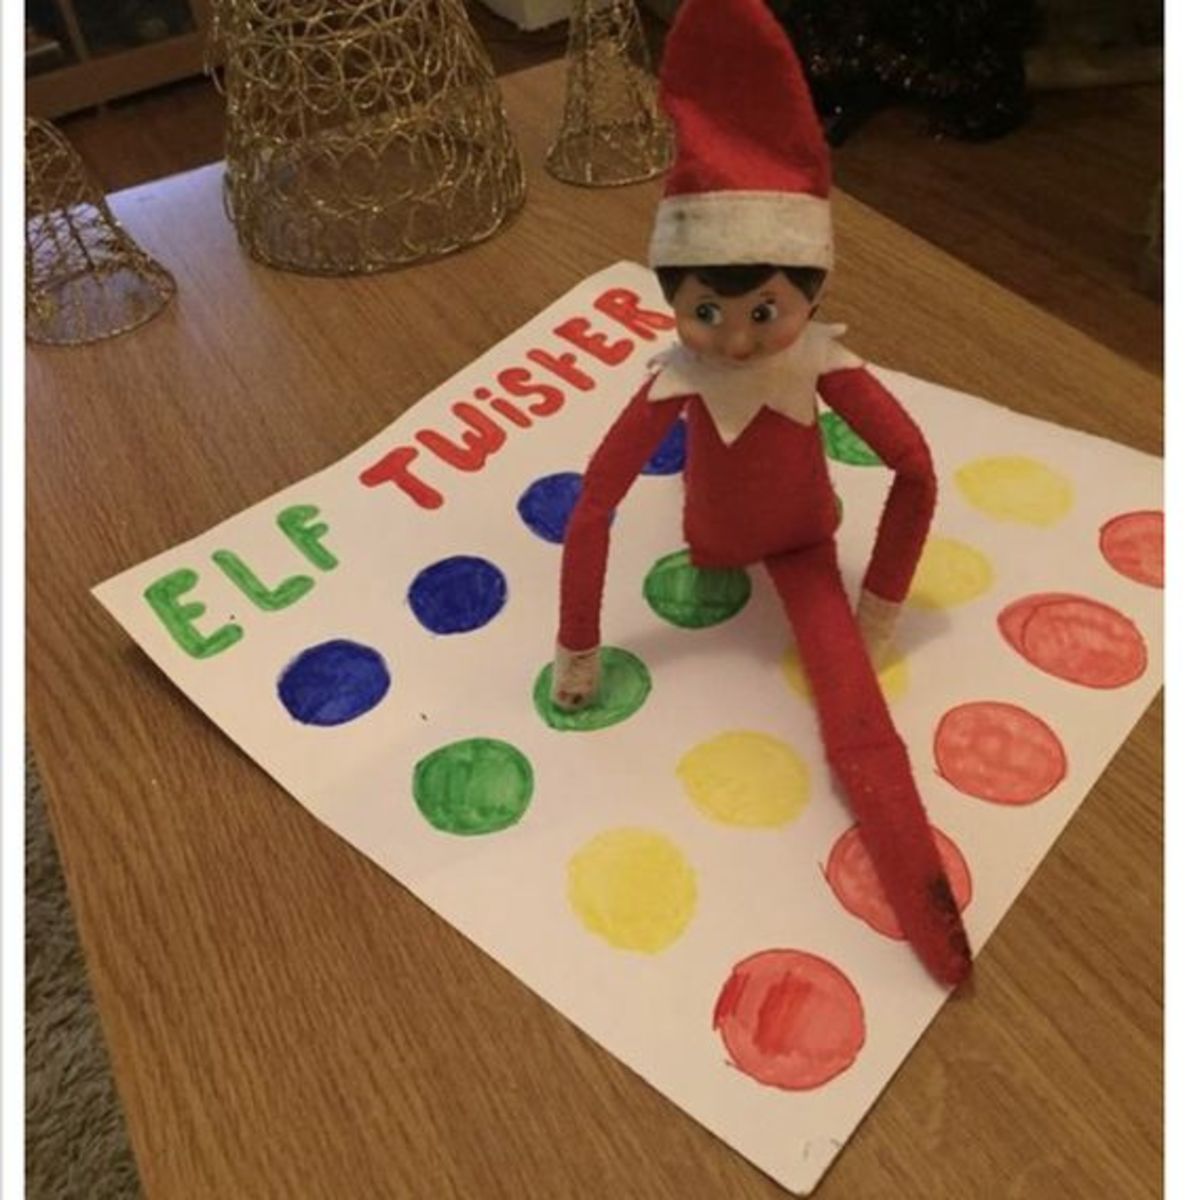 Elf challenges you to a game of Twister. 